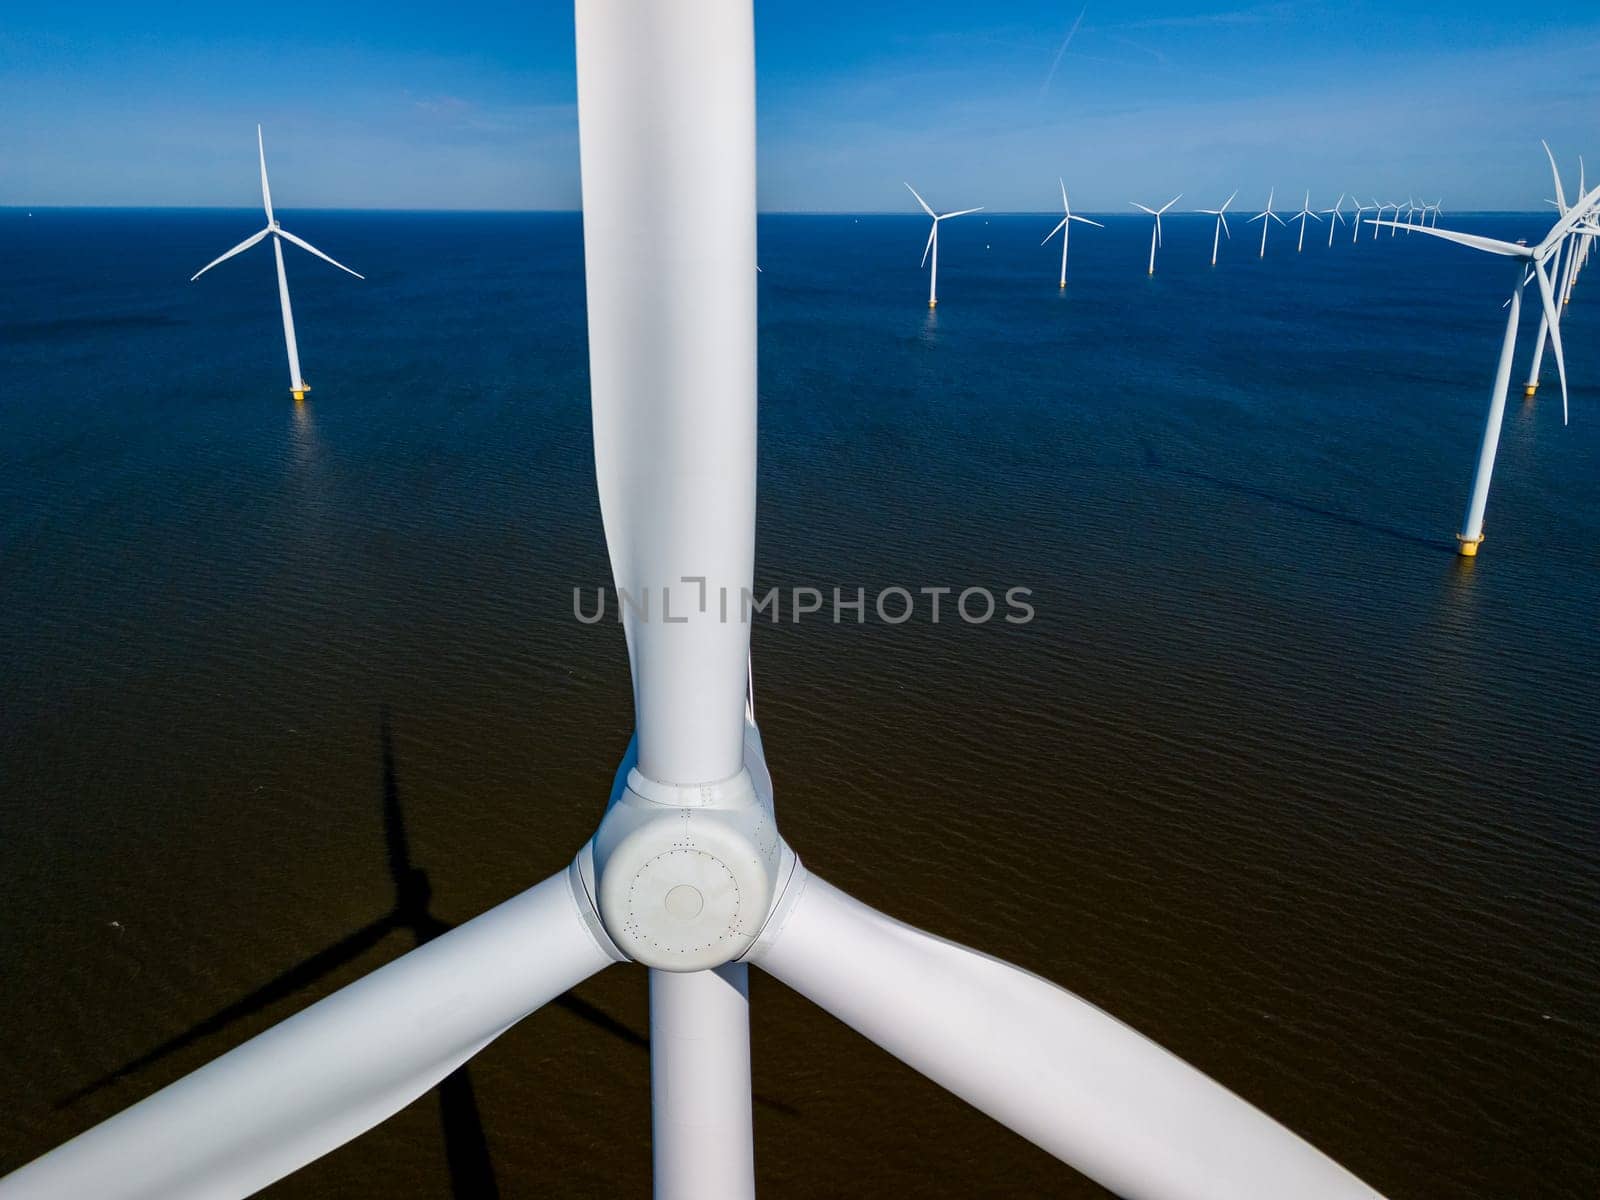 A mesmerizing aerial view of a wind farm featuring rows of windmill turbinesin Spring by fokkebok